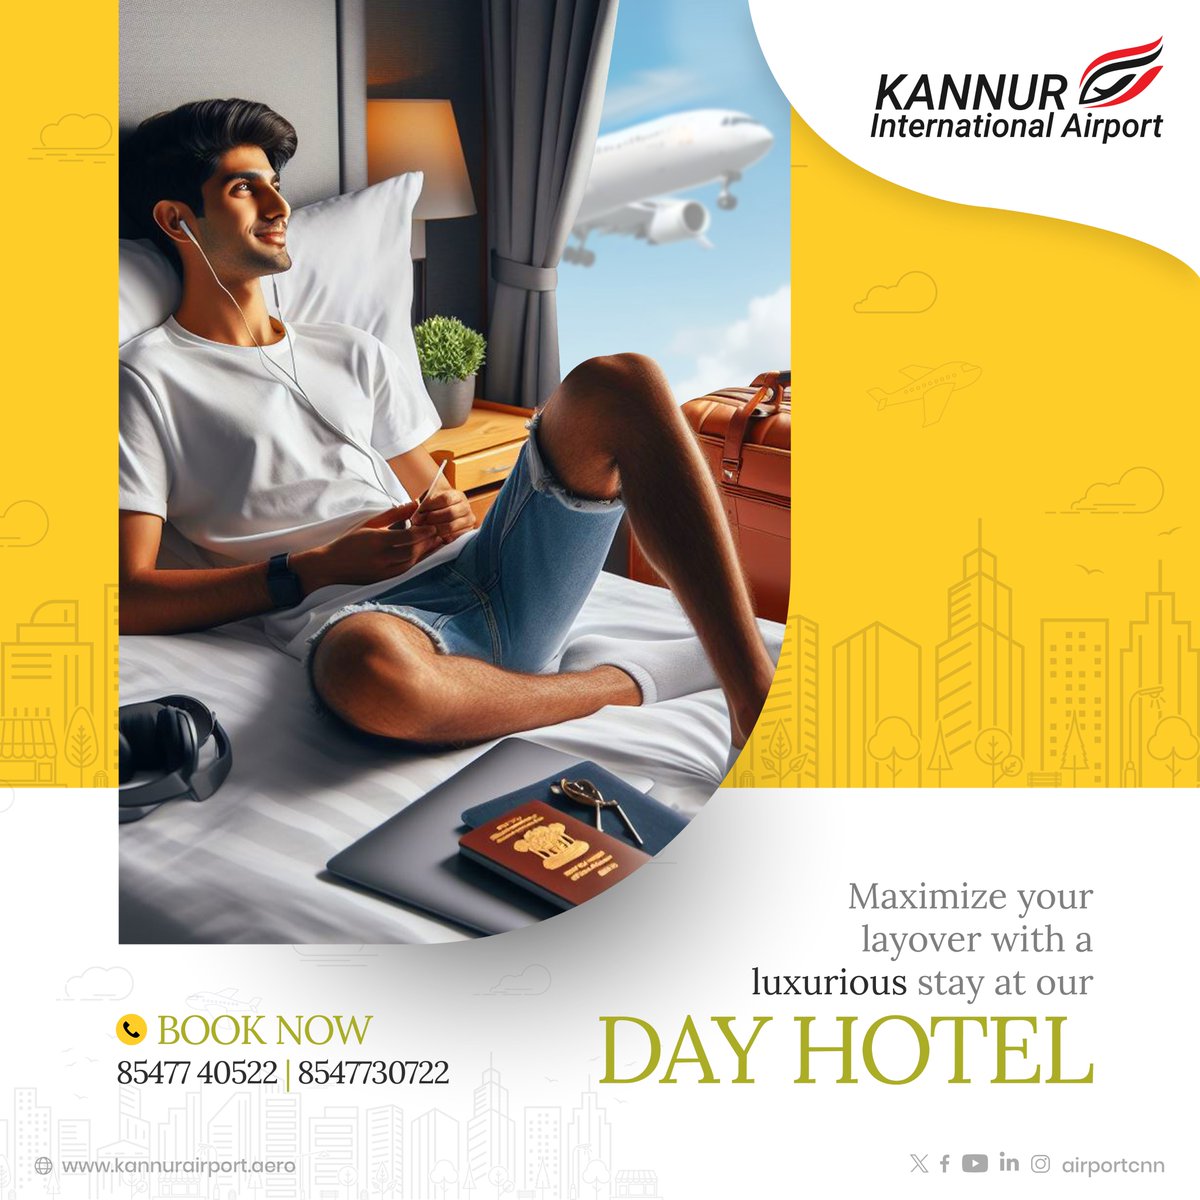 Maximize your layover with a luxurious stay at our
Day Hotel
BOOK NOW
85477 40522, 85477 30722
#kannurinternationalairport #DayHotel #flywithkial #KIAL #kannur